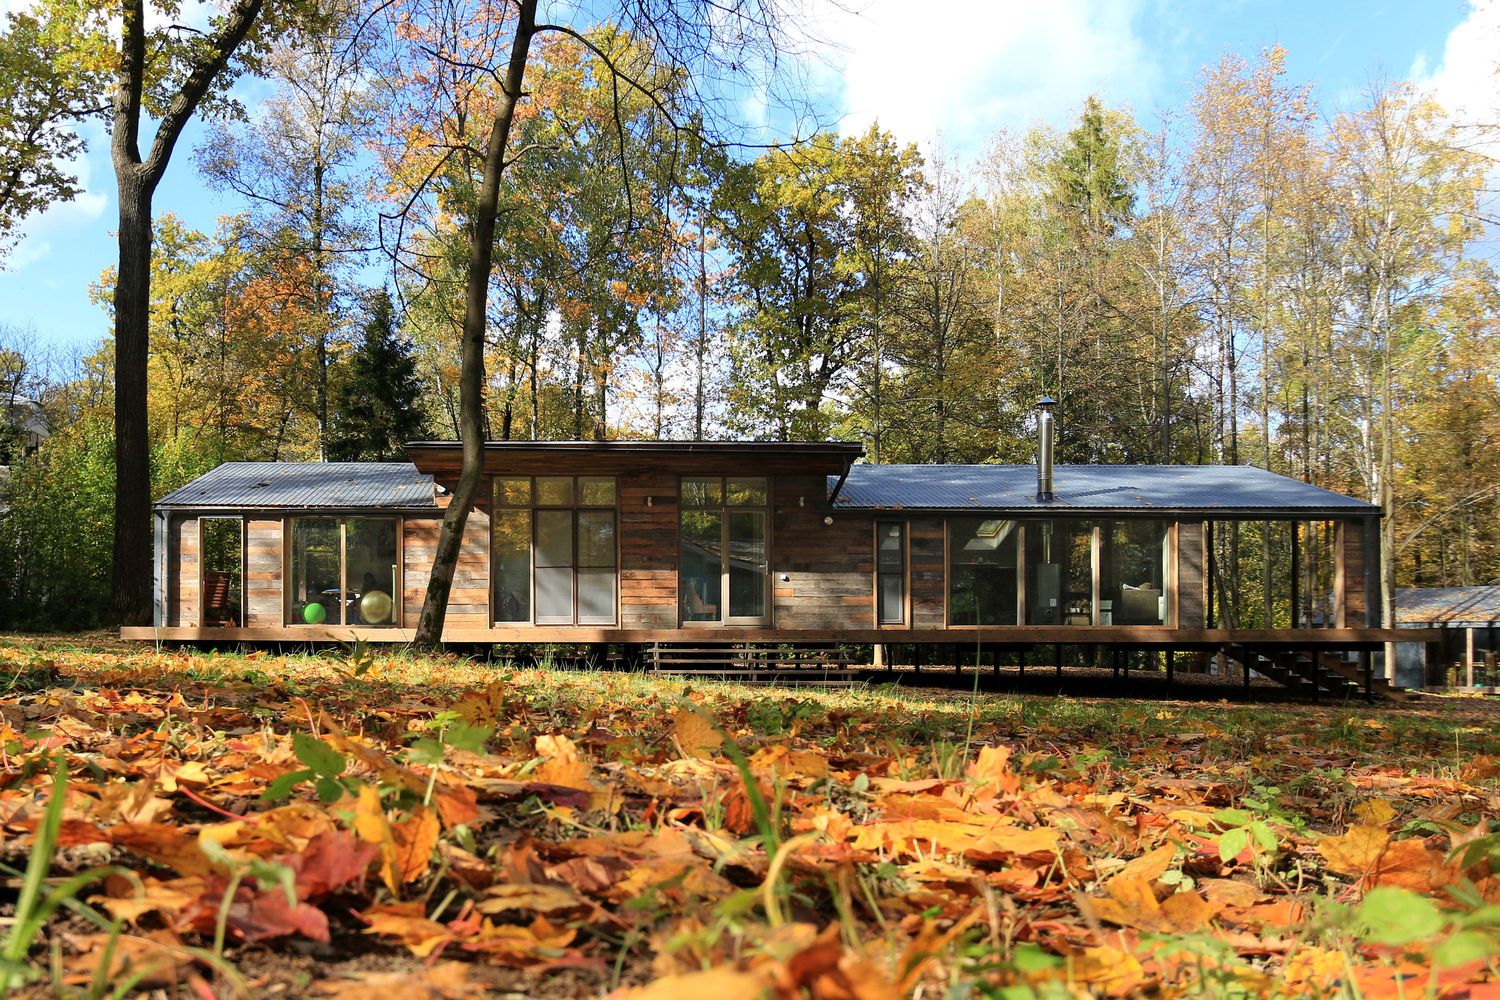 This Prefab Cabin Was Built in 10 Days for Only $80,000